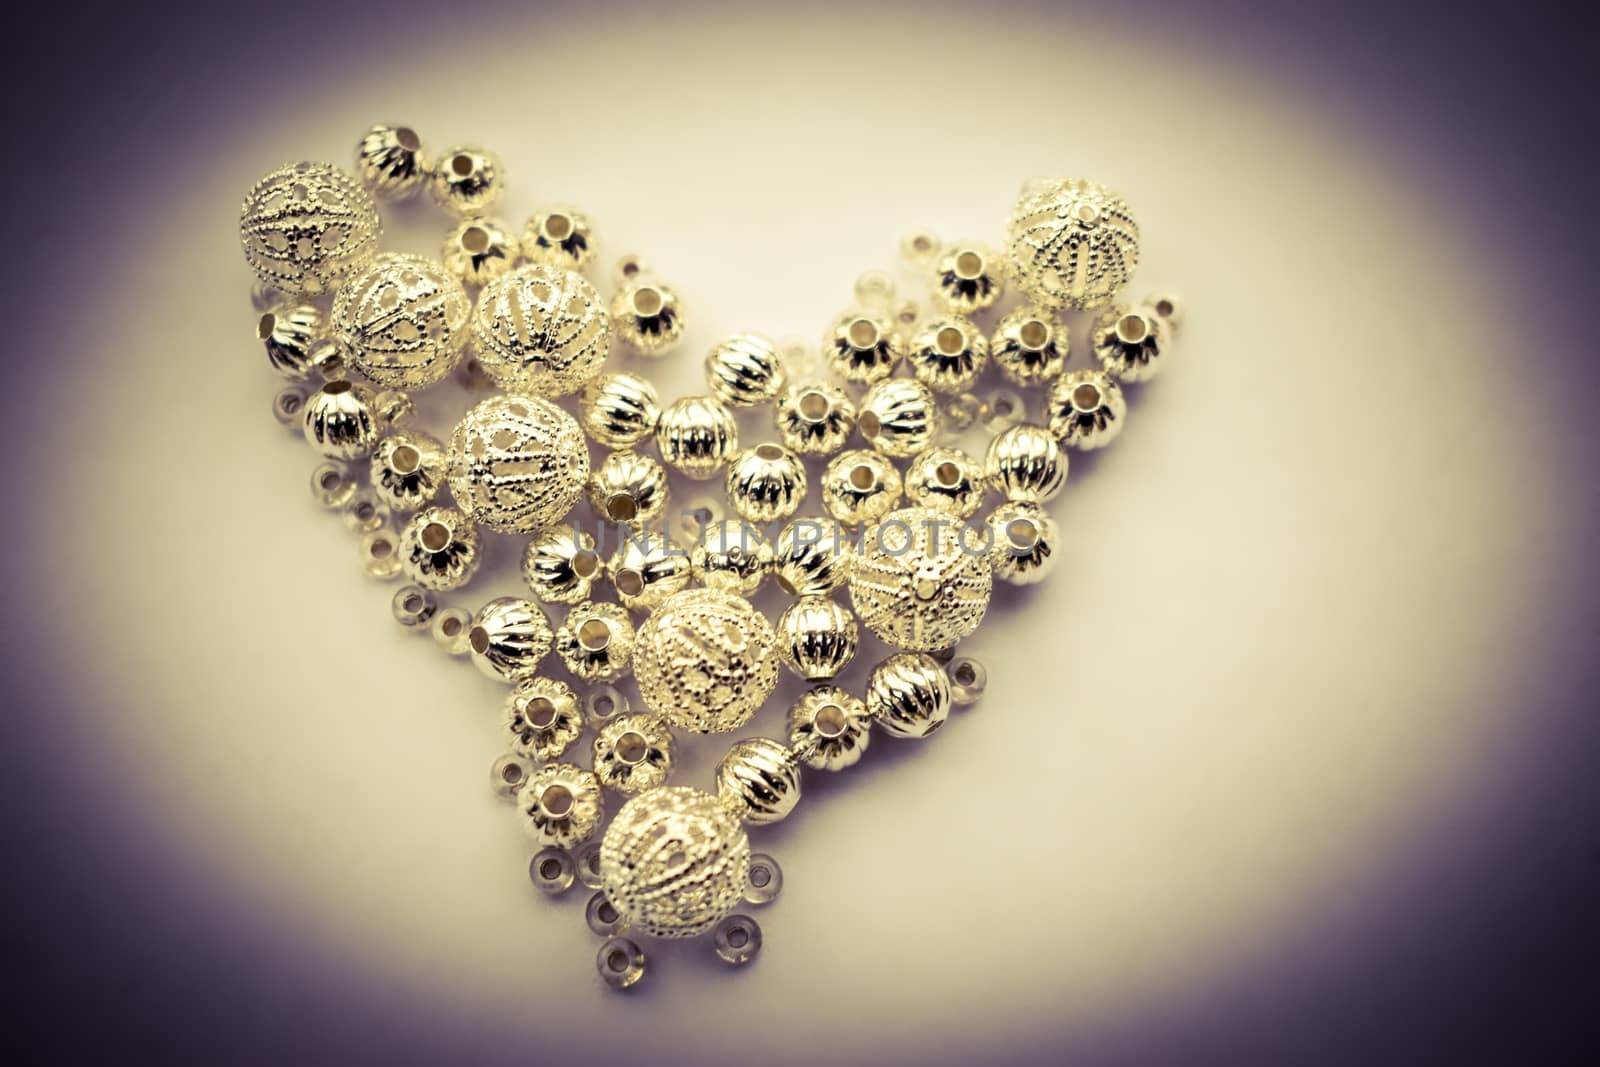 selection of different silver beads shaped into a heart